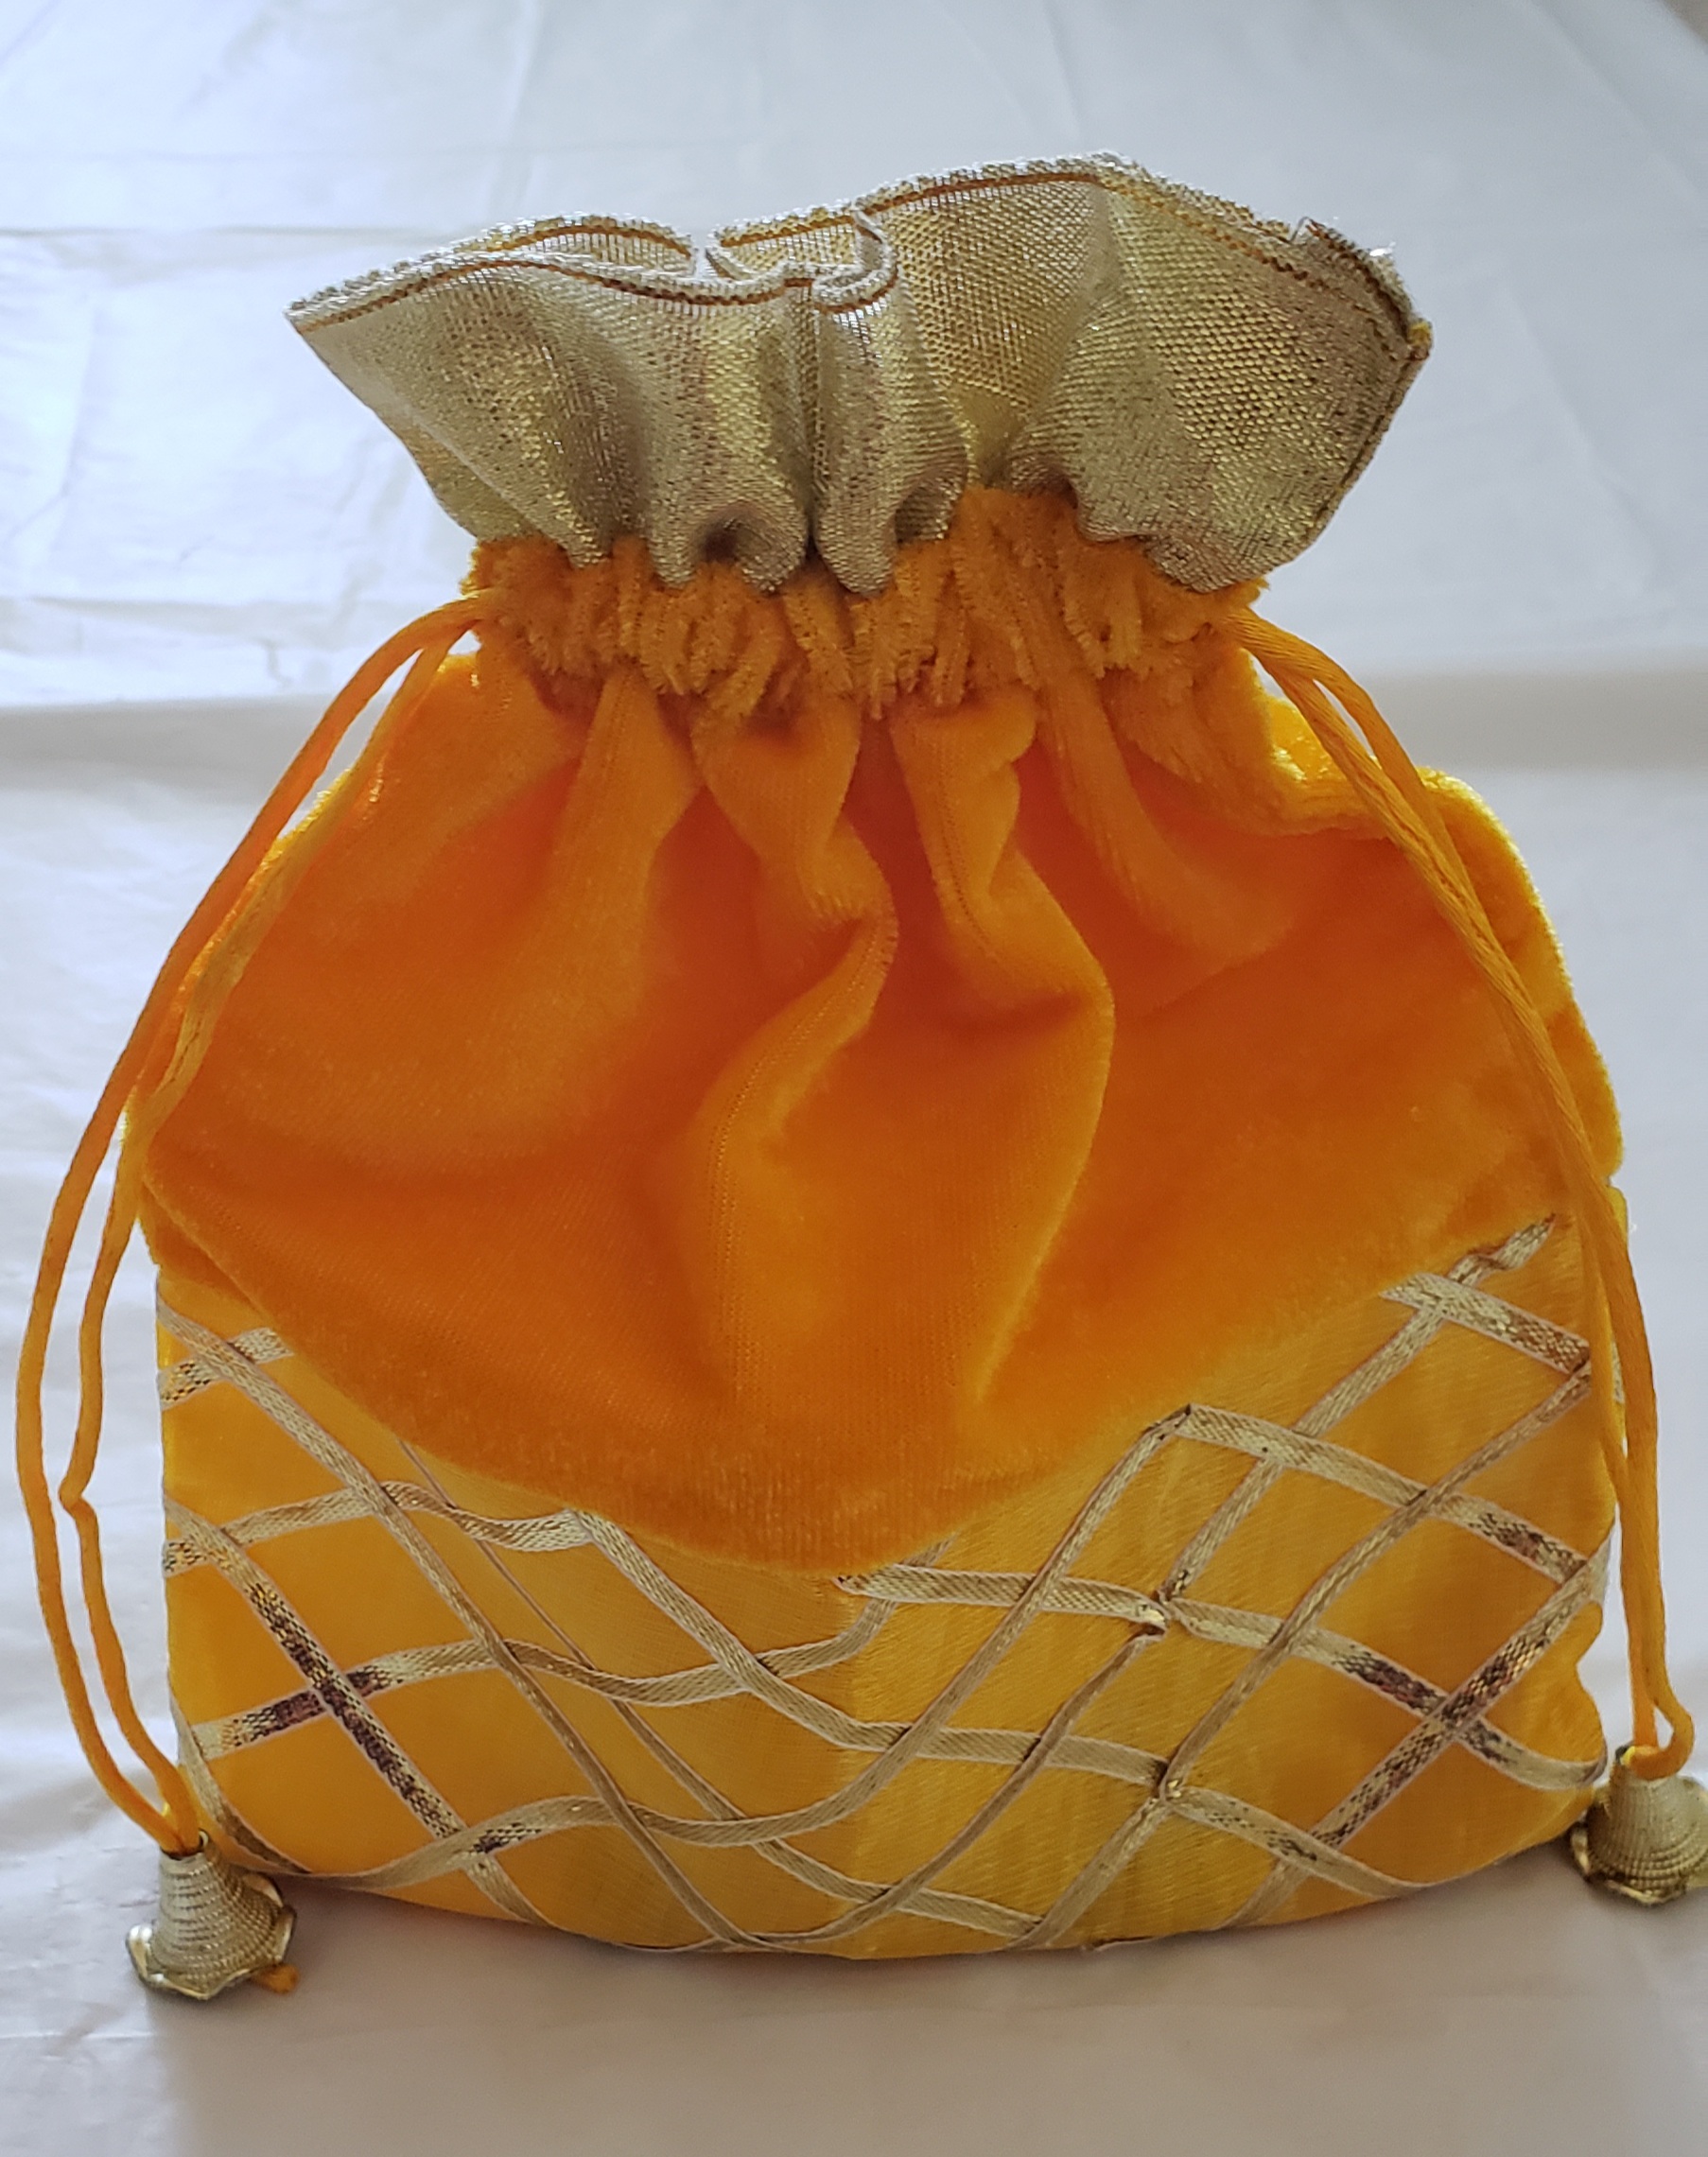 Silver Housewarming Gifts: Griha Pravesh Ceremony Gift Ideas